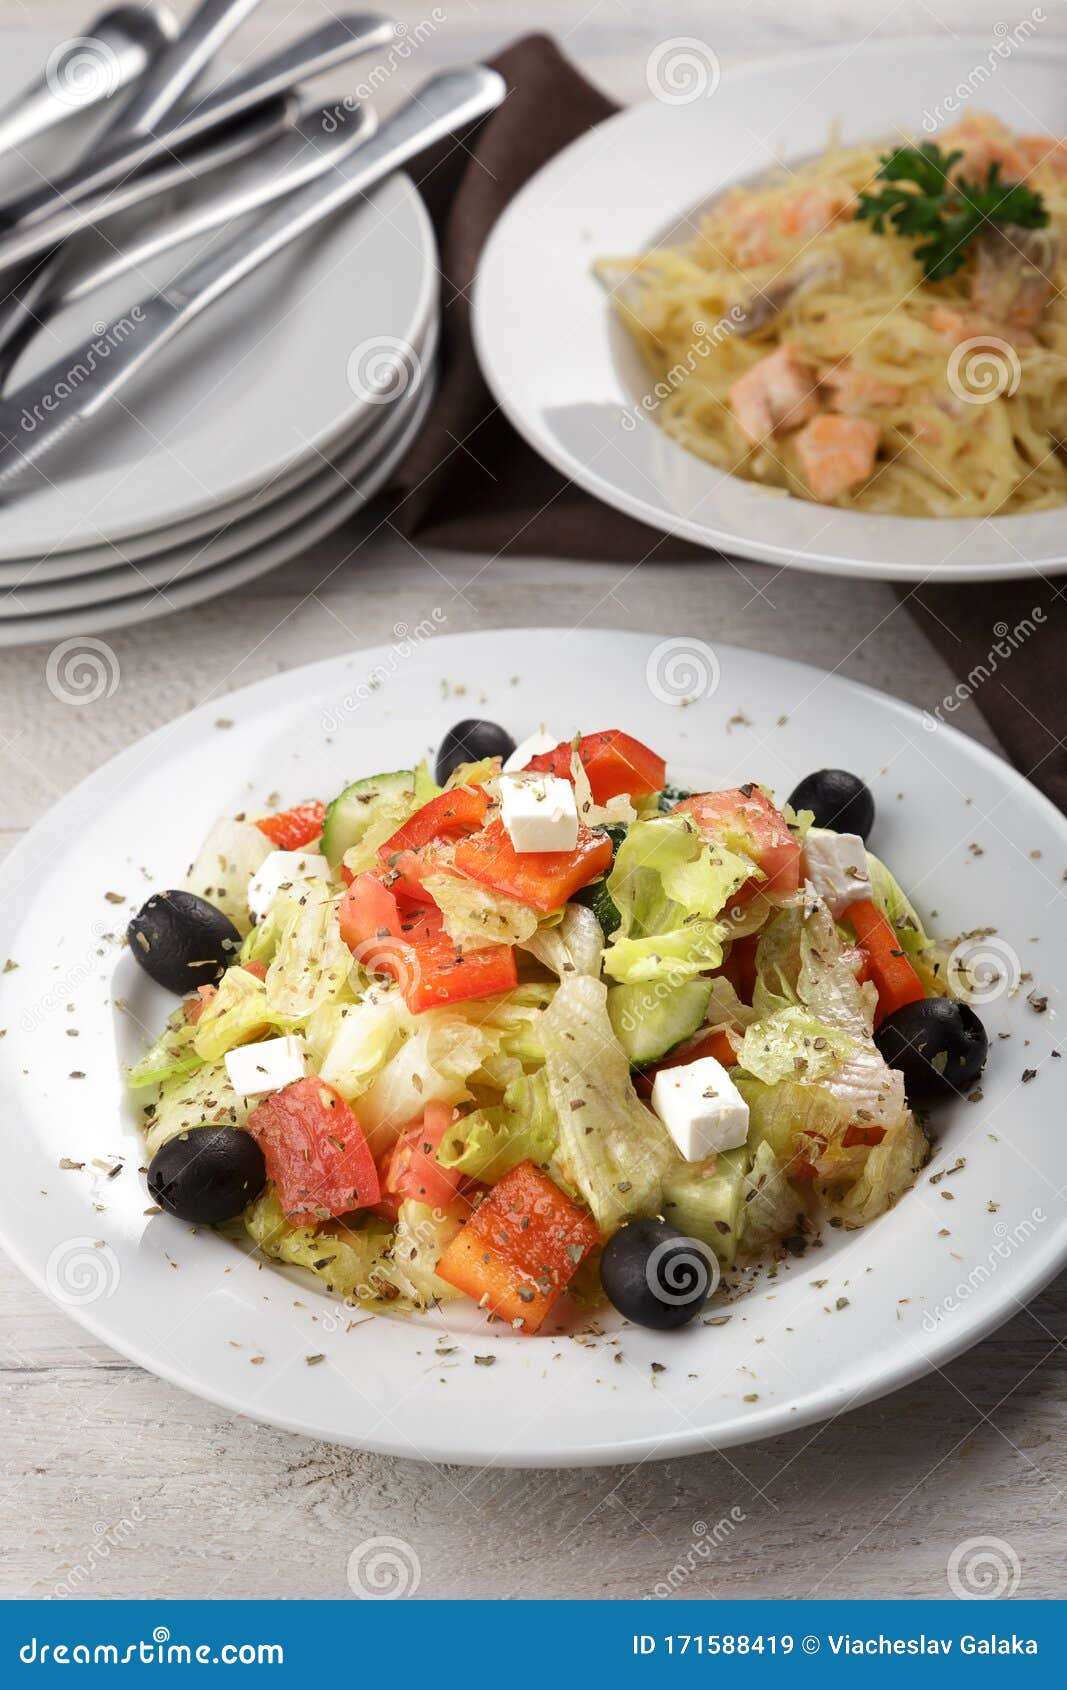 Greek Salad with Feta Cheese Stock Image - Image of herb, healthy ...